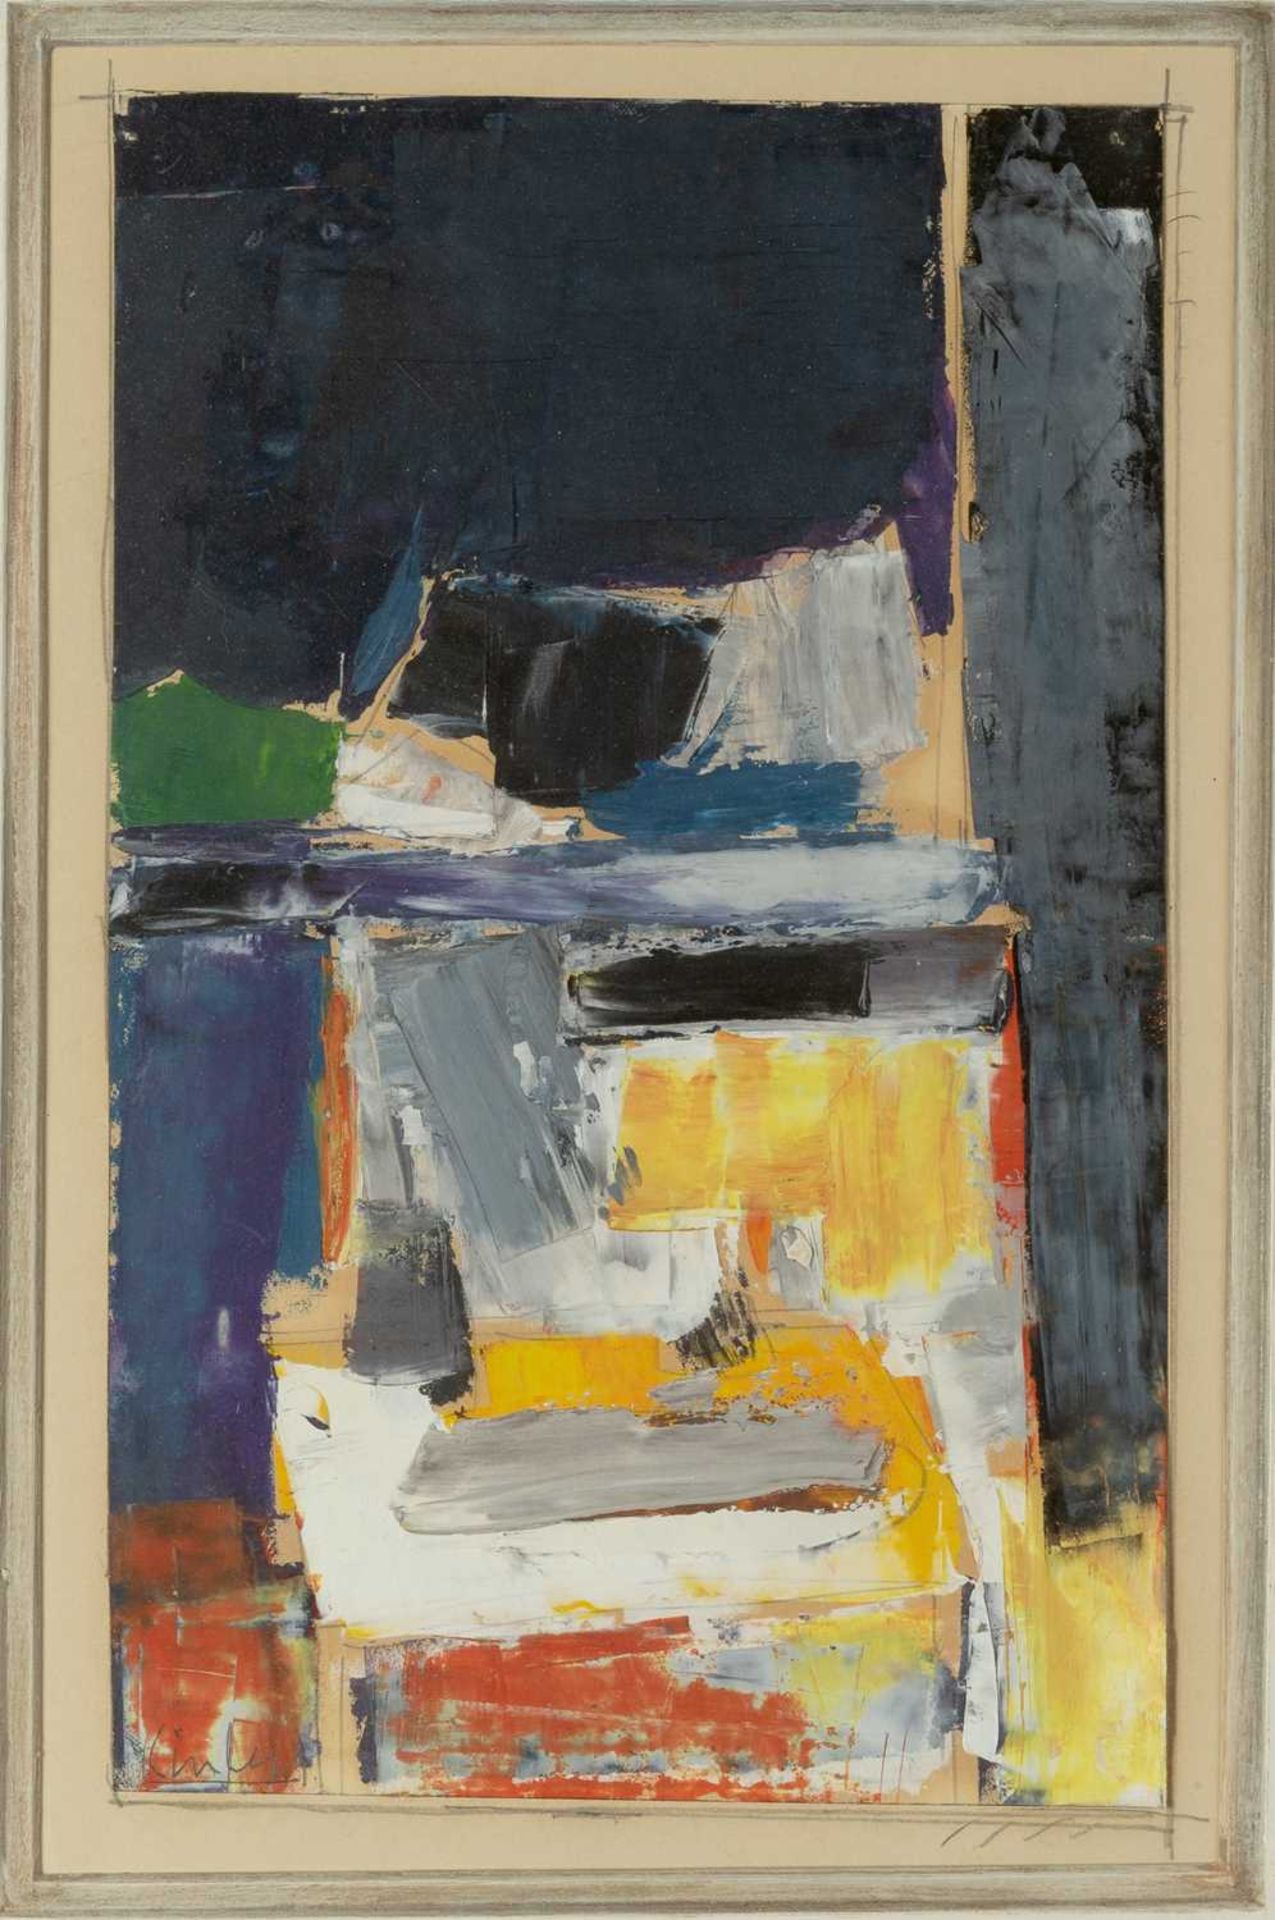 Peter Kinley (1926-1988) Untitled signed (lower left) oil on card 30 x 20cm. Provenance: The